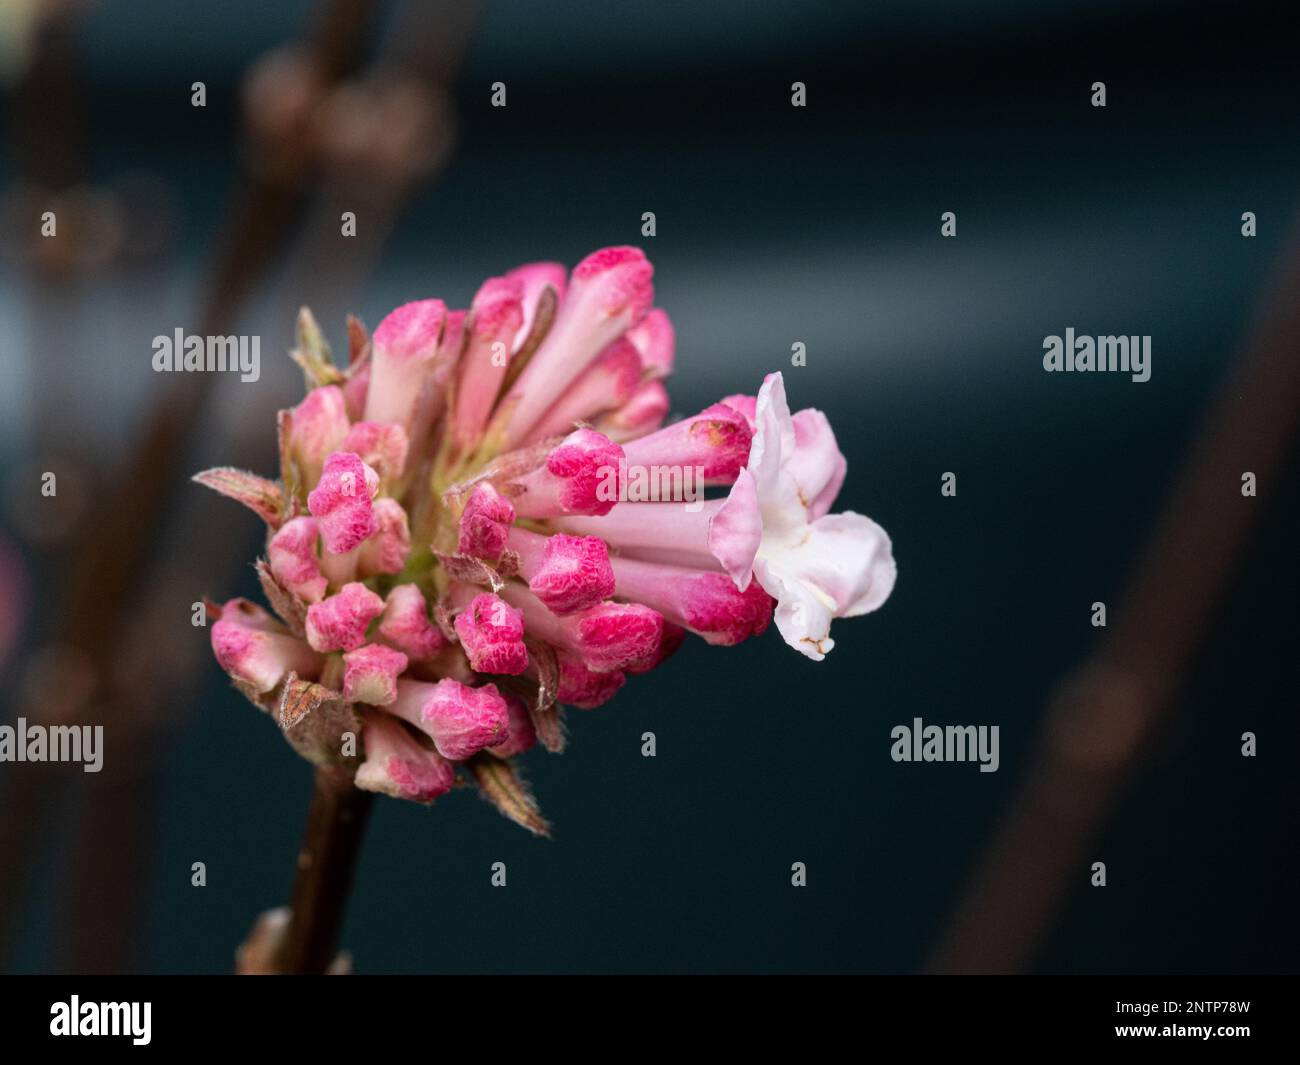 A group of the deep pink tipped flower buds of Viburnum x bodnantense 'Charles Lamont' Stock Photo